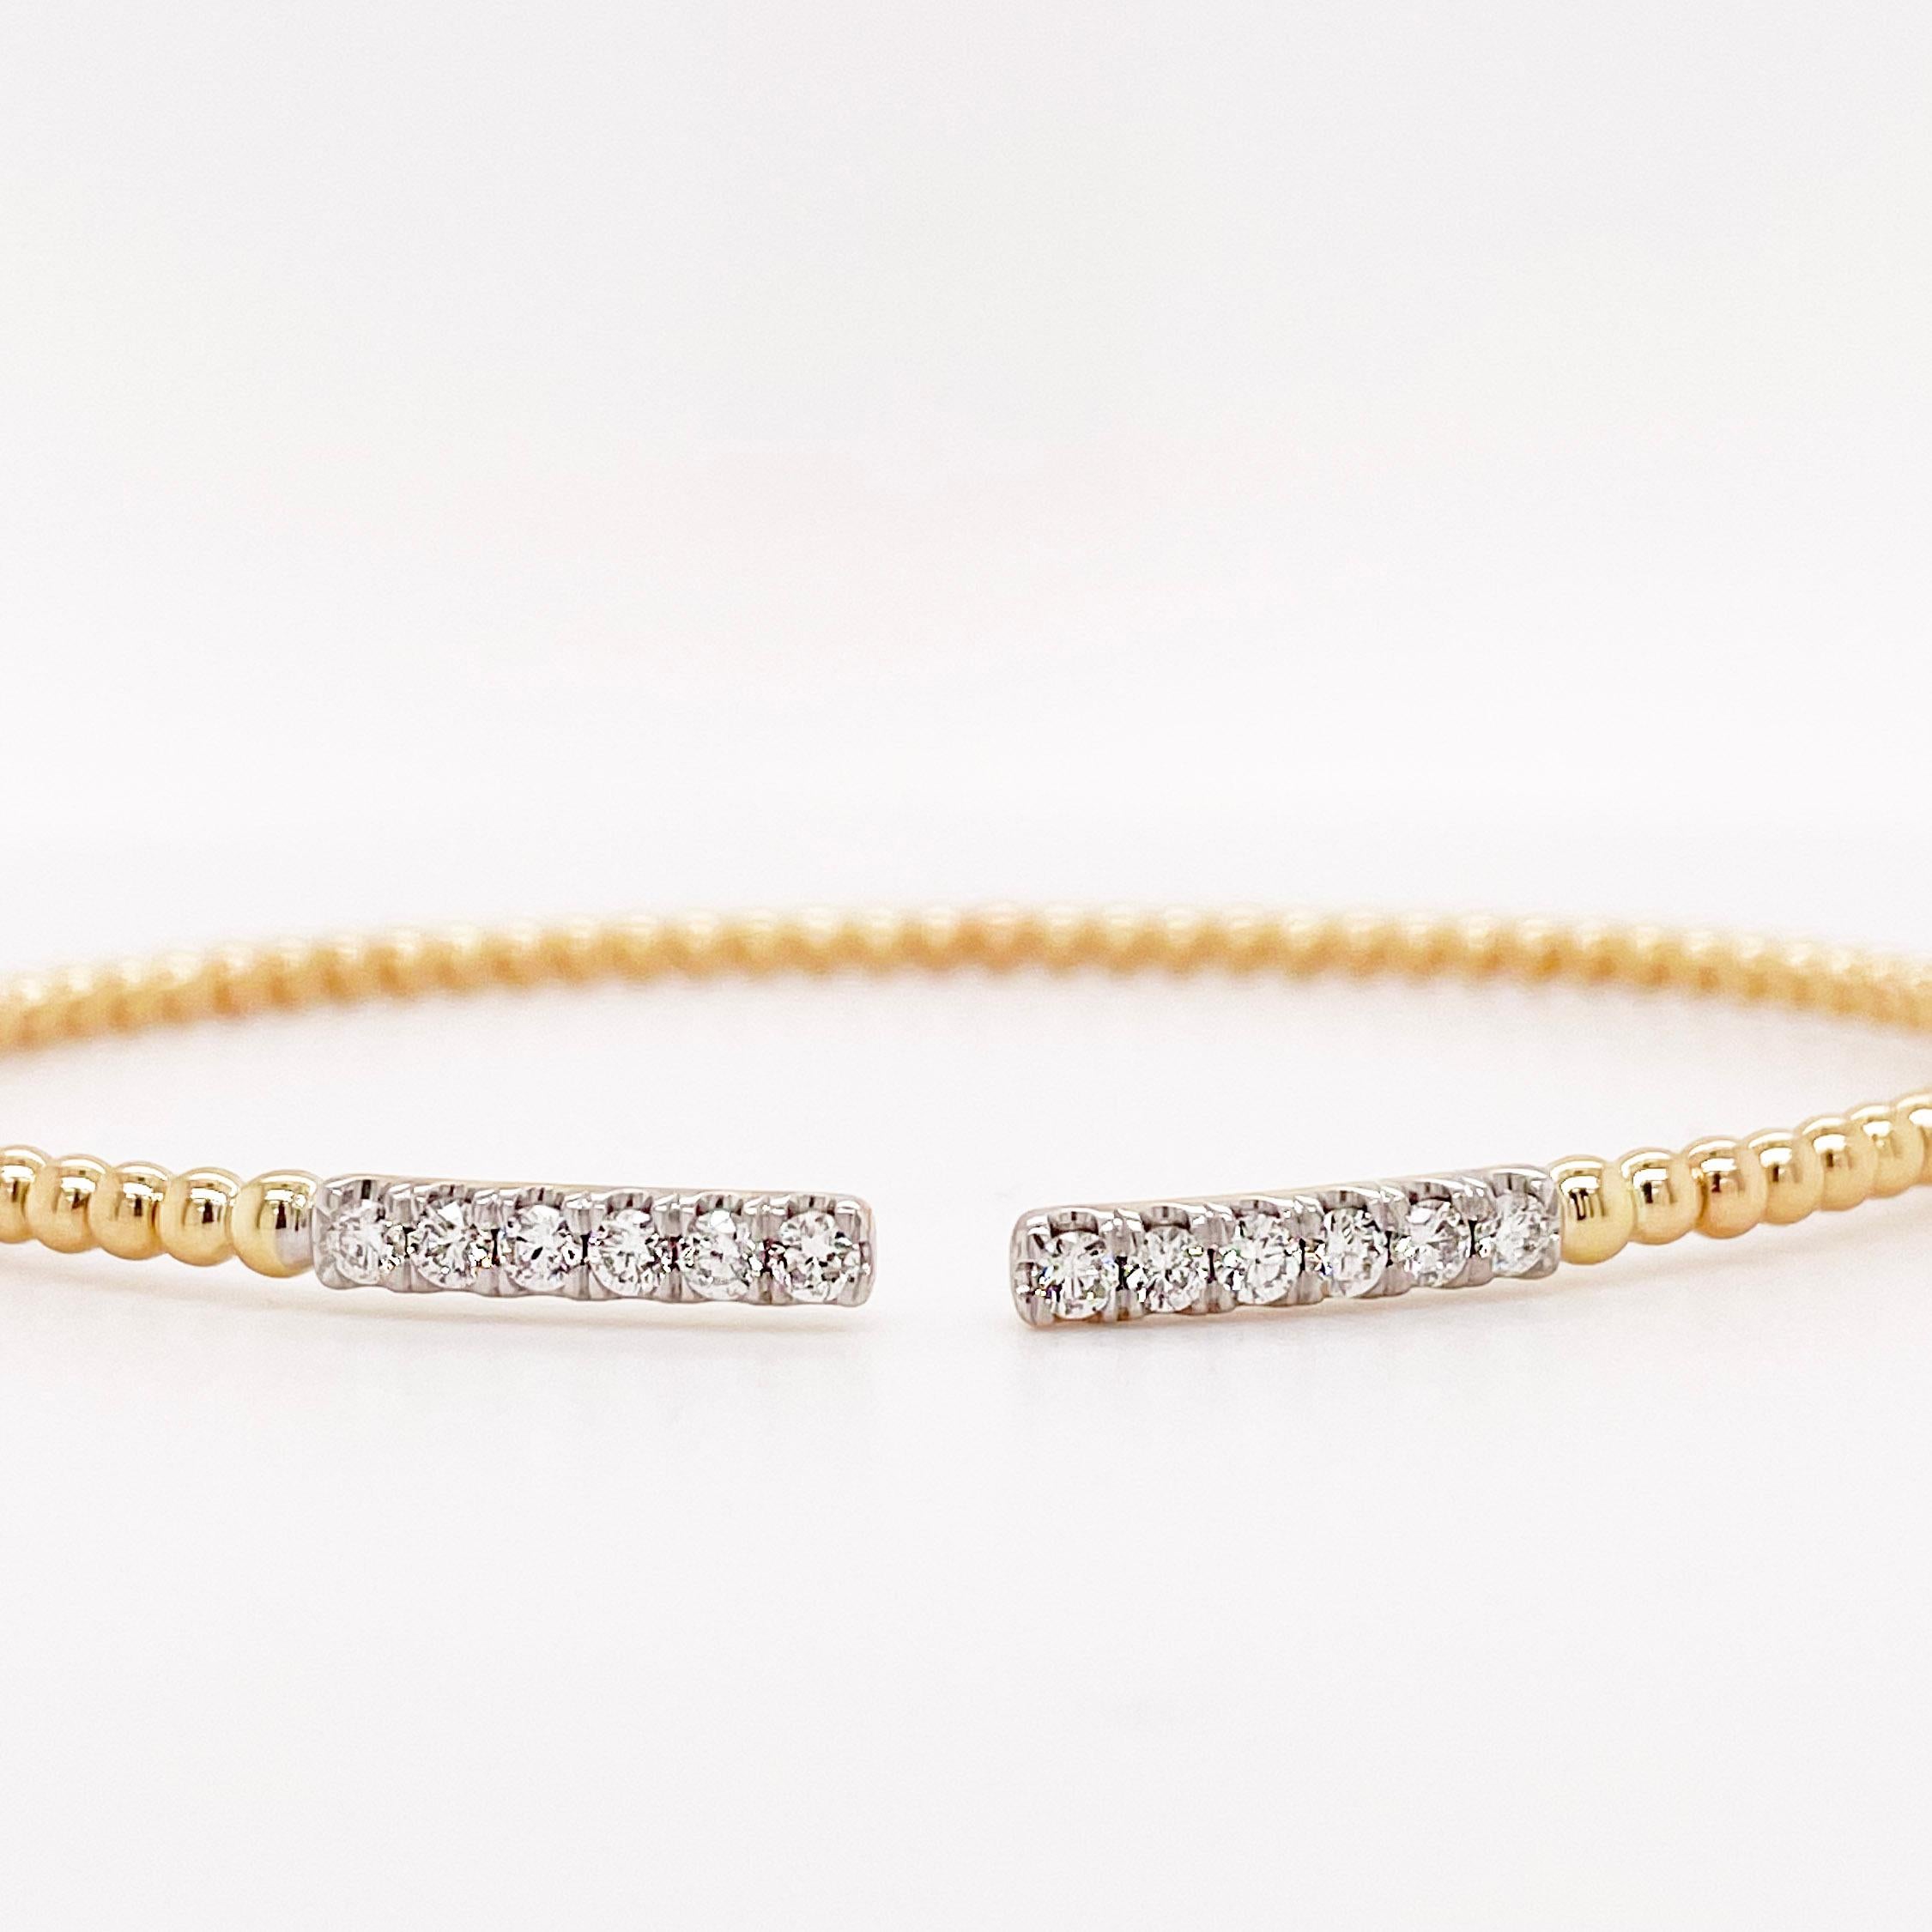 This stunning beaded cuff bracelet with a diamond pave bar is the perfect band to compliment any look. Its timeless design and flexibility make it a great cuff to wear alone or stacked with other bracelets. Its mixed metal look makes it versatile to